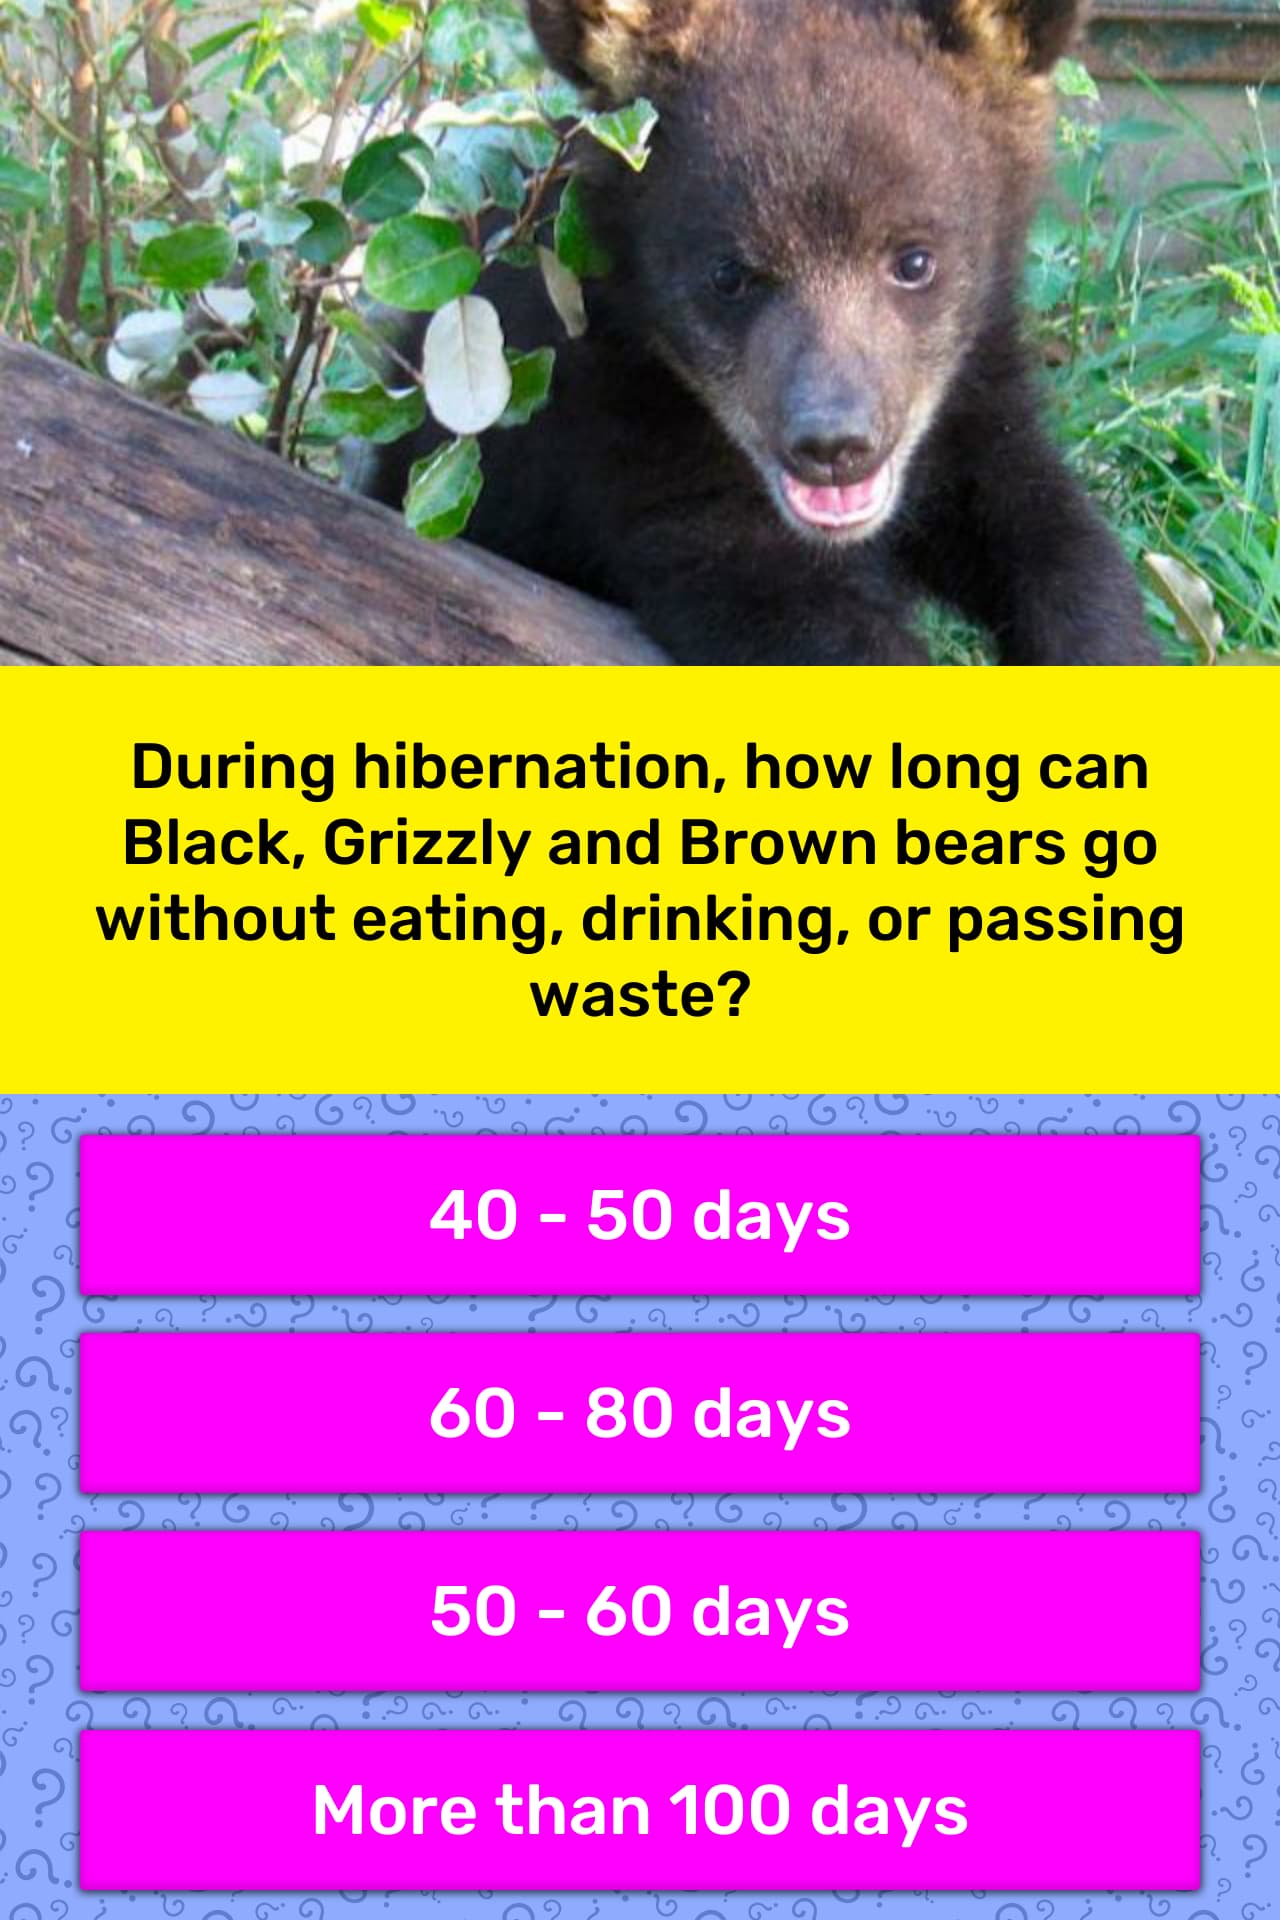 How long can a bear survive without water?